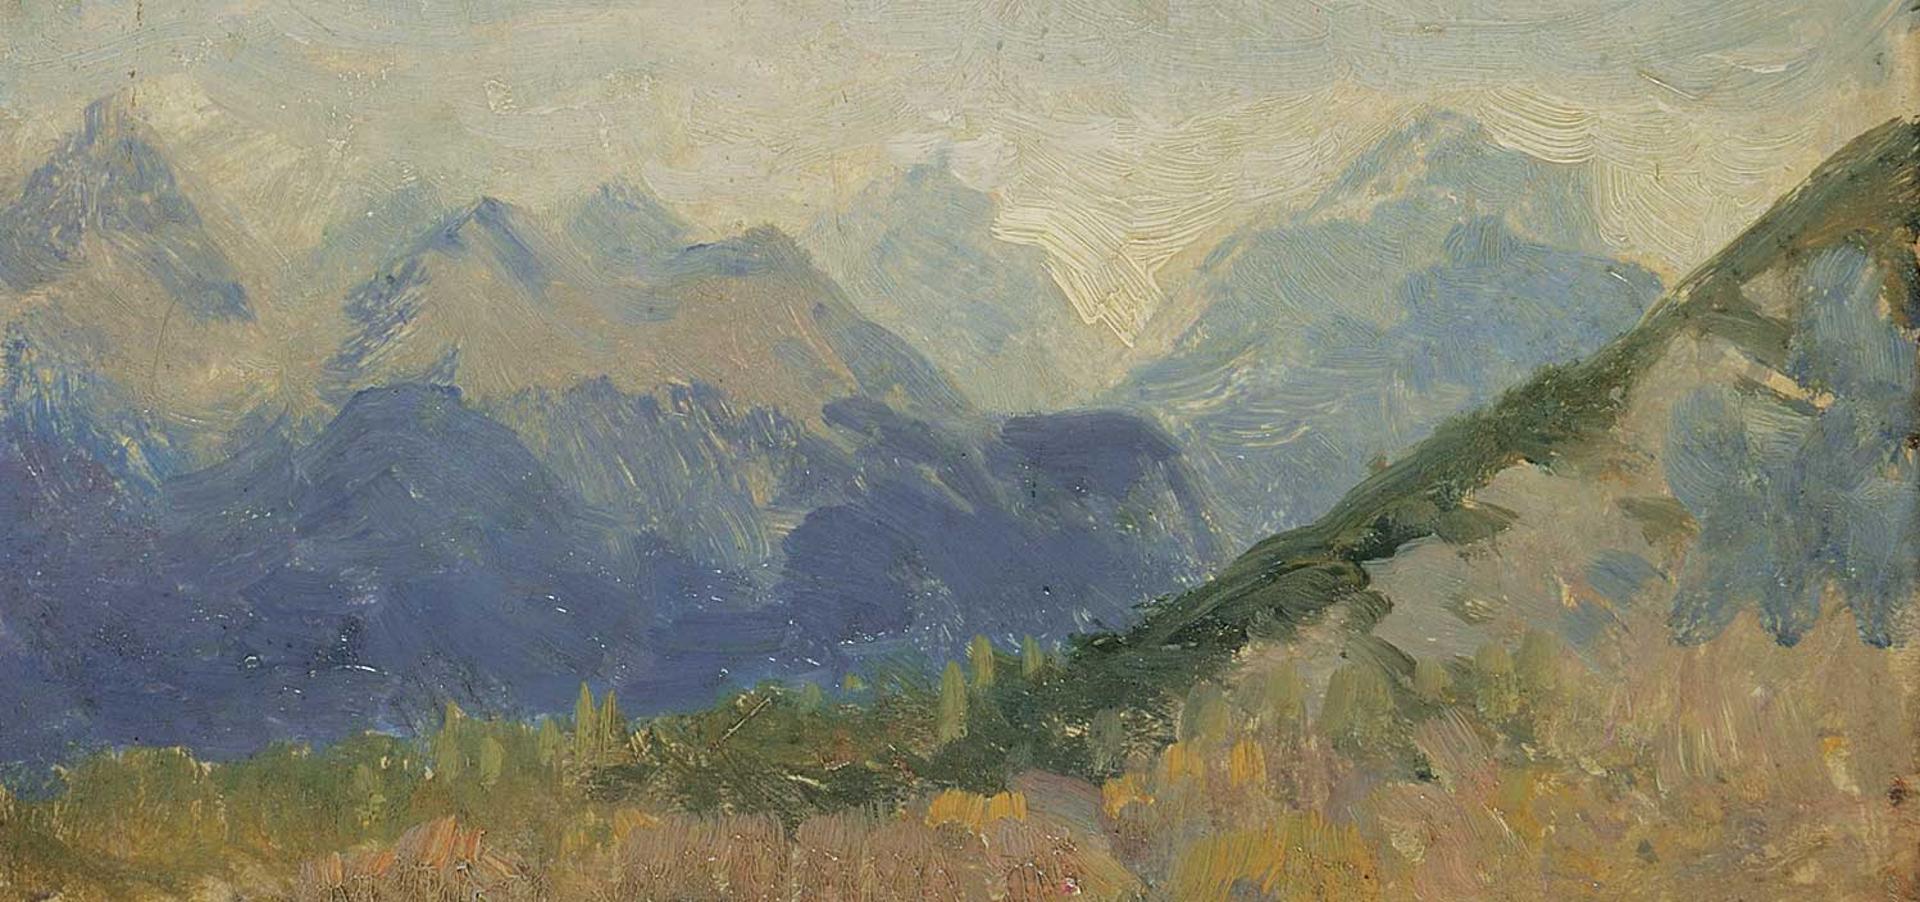 Frederic Martlett Bell-Smith (1846-1923) - Selkirk Mts. Sketch